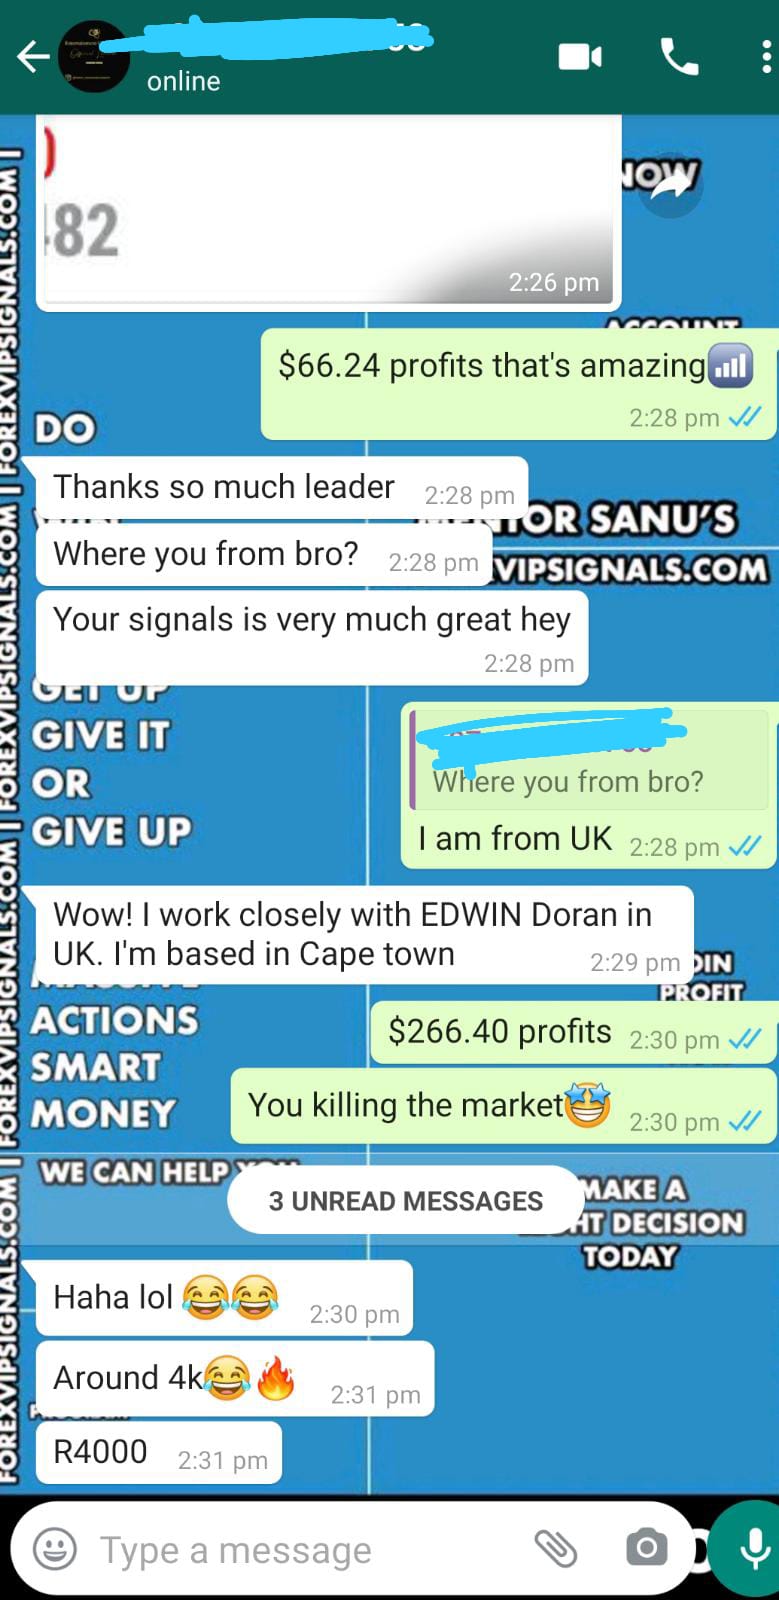 live trading signals with forex vip signals